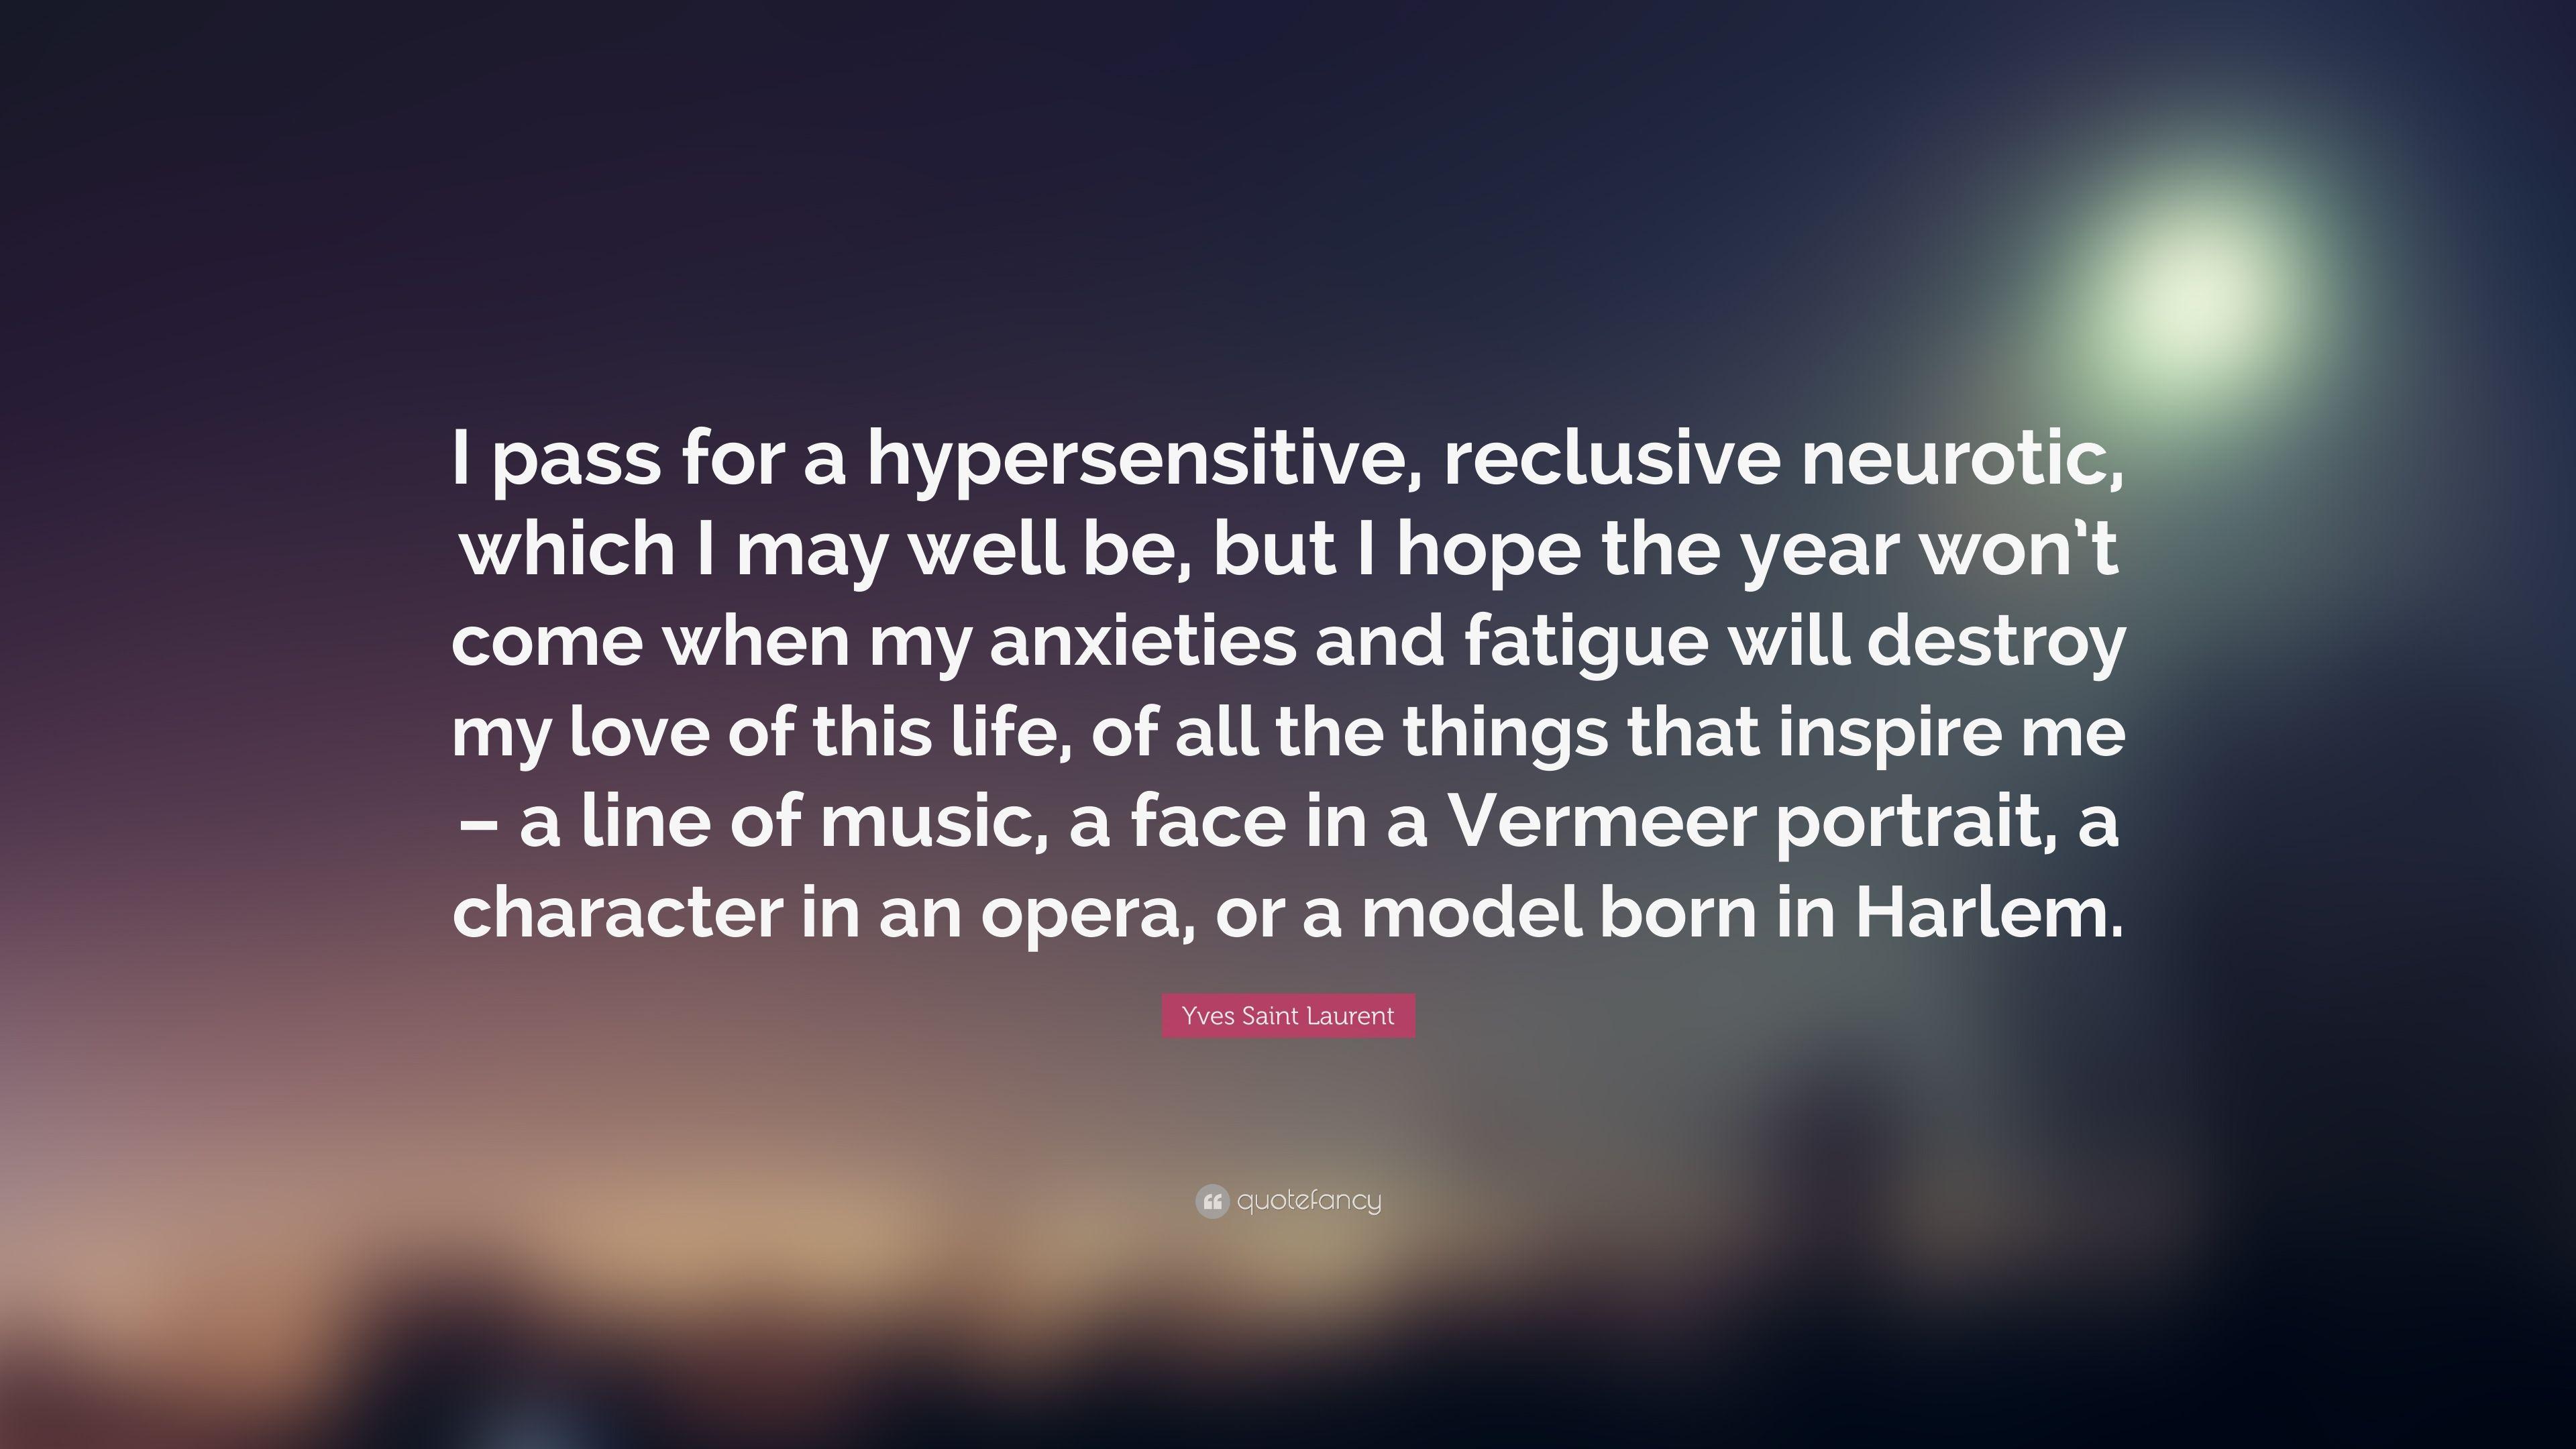 Yves Saint Laurent Quote: “I pass for a hypersensitive, reclusive